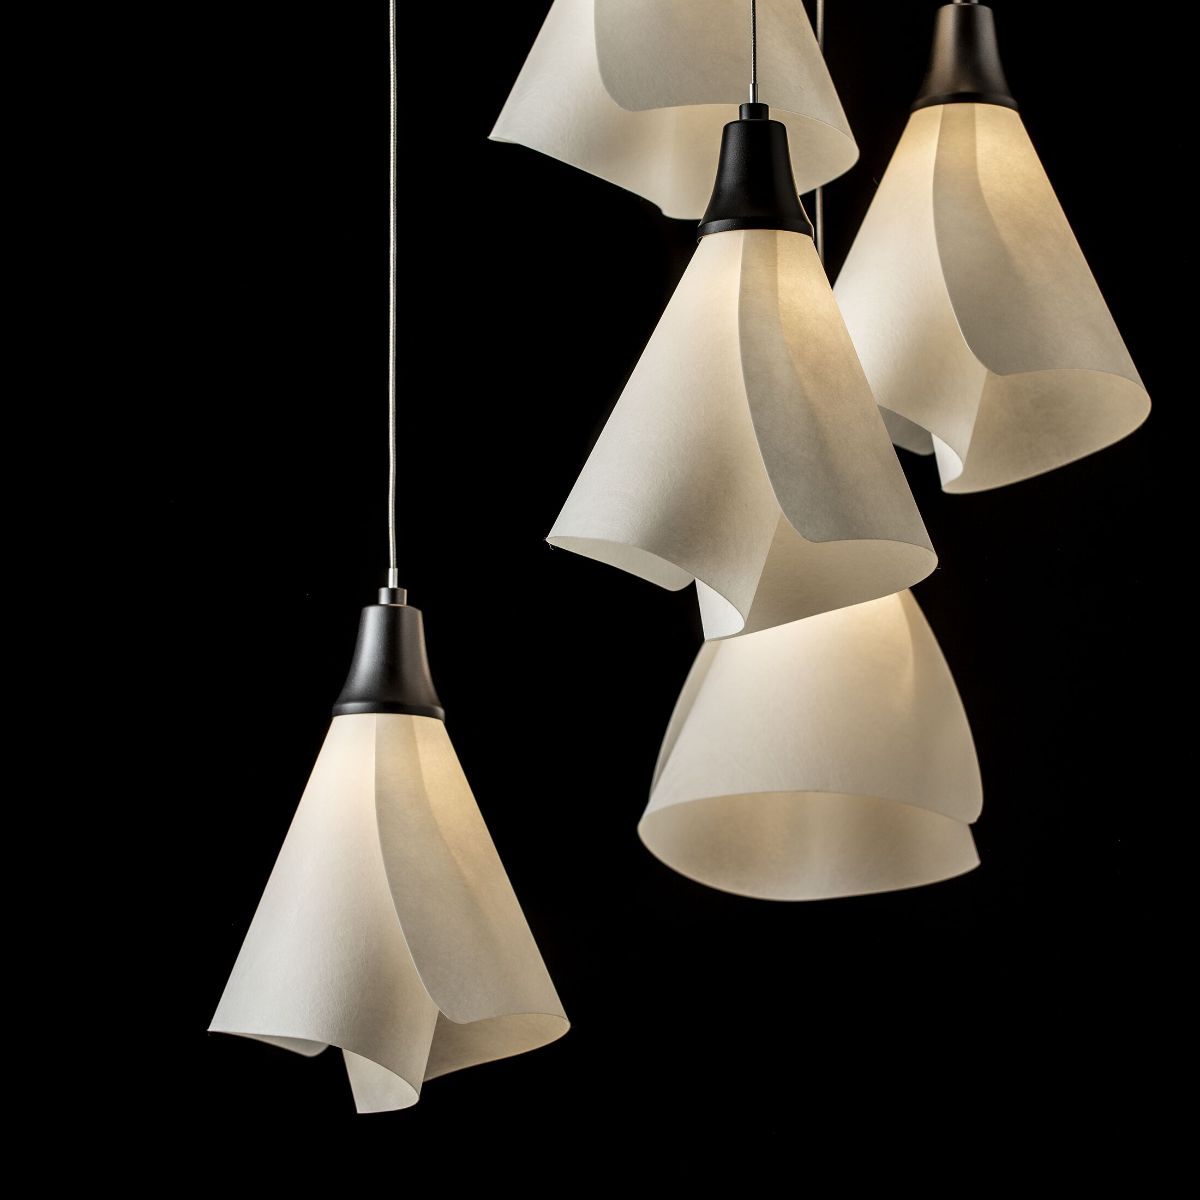 Mobius 9 Lights Pendant Light with Long Height - Bees Lighting